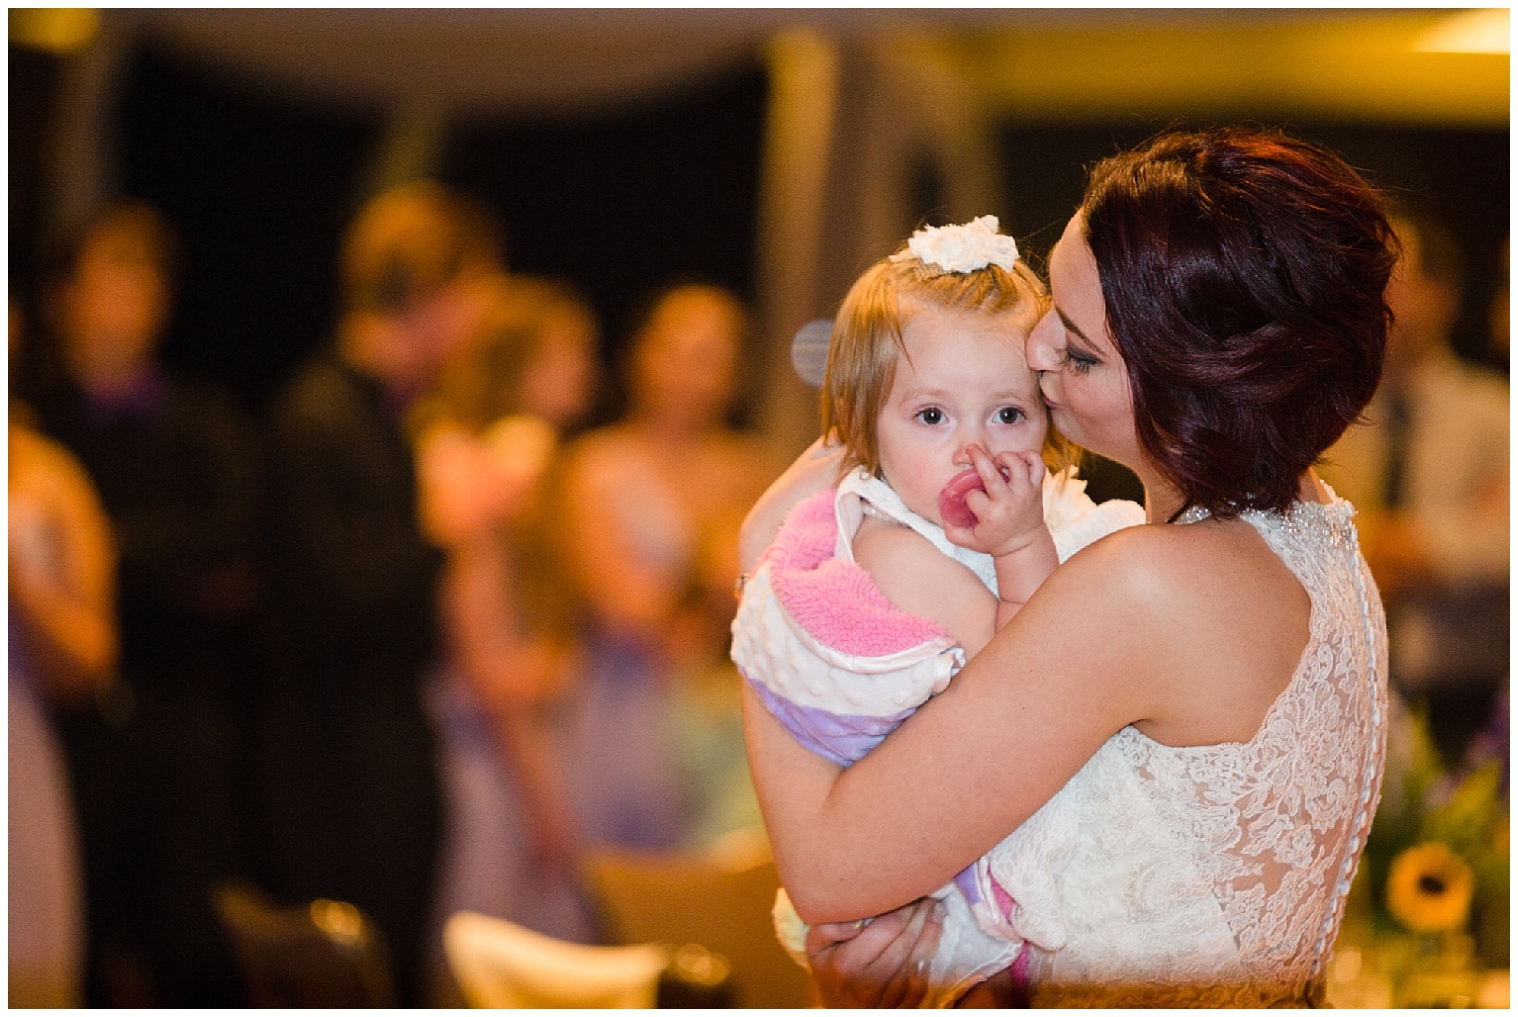 Bride holds her daughter during a special dance during her Sevens wedding in Breckenridge.